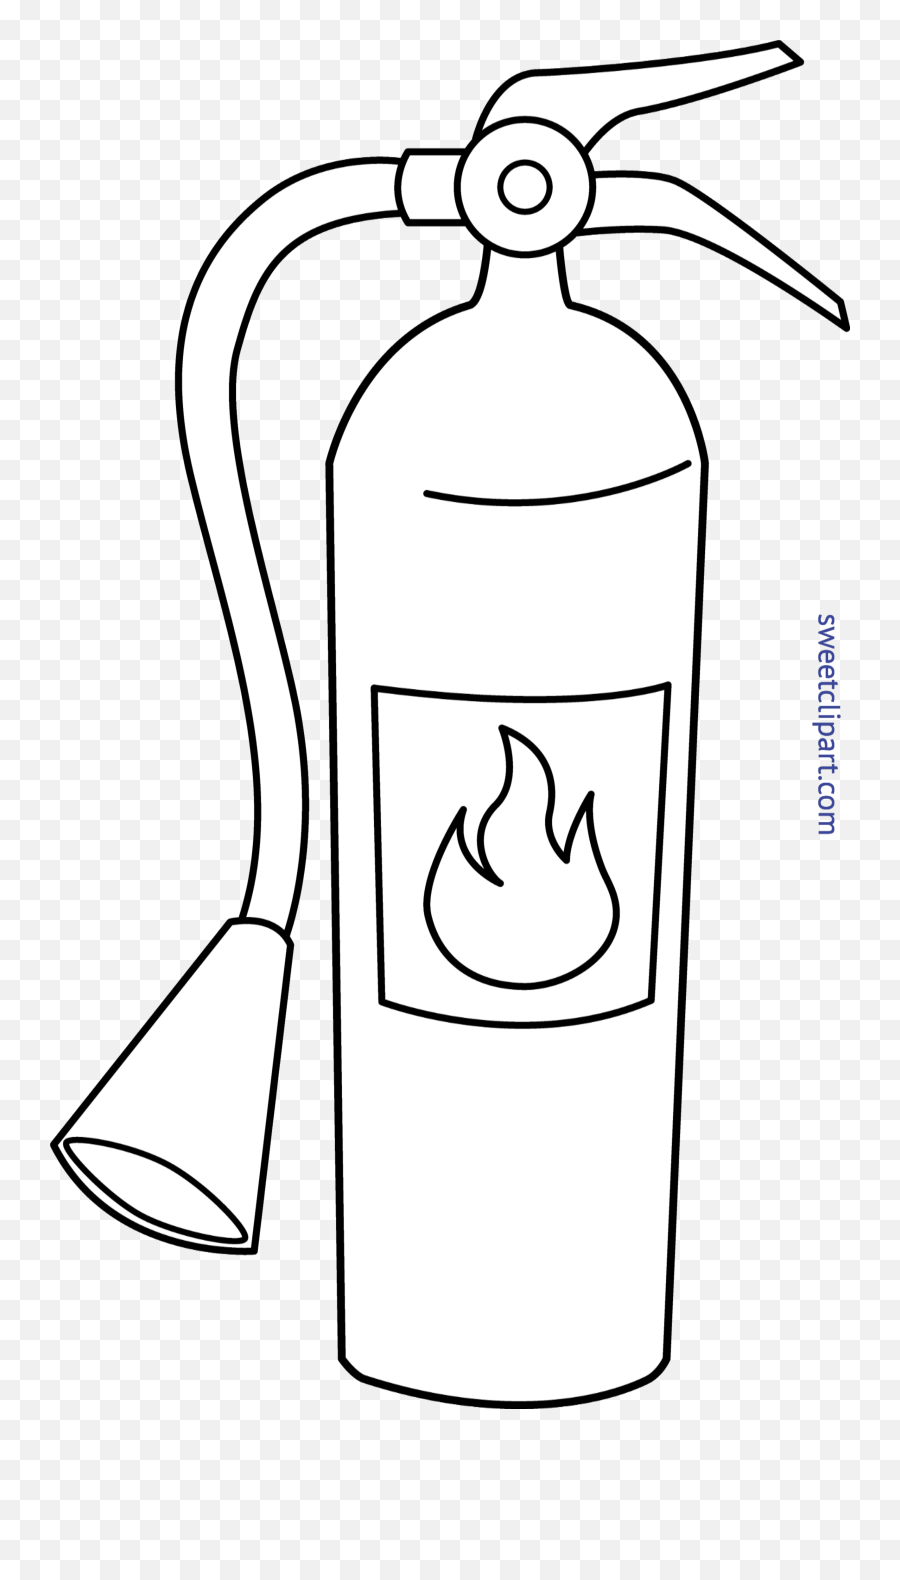 Download Fire Extinguisher Line Art - Easy To Draw Fire Extinguisher Emoji,Fire Emoji Black And White